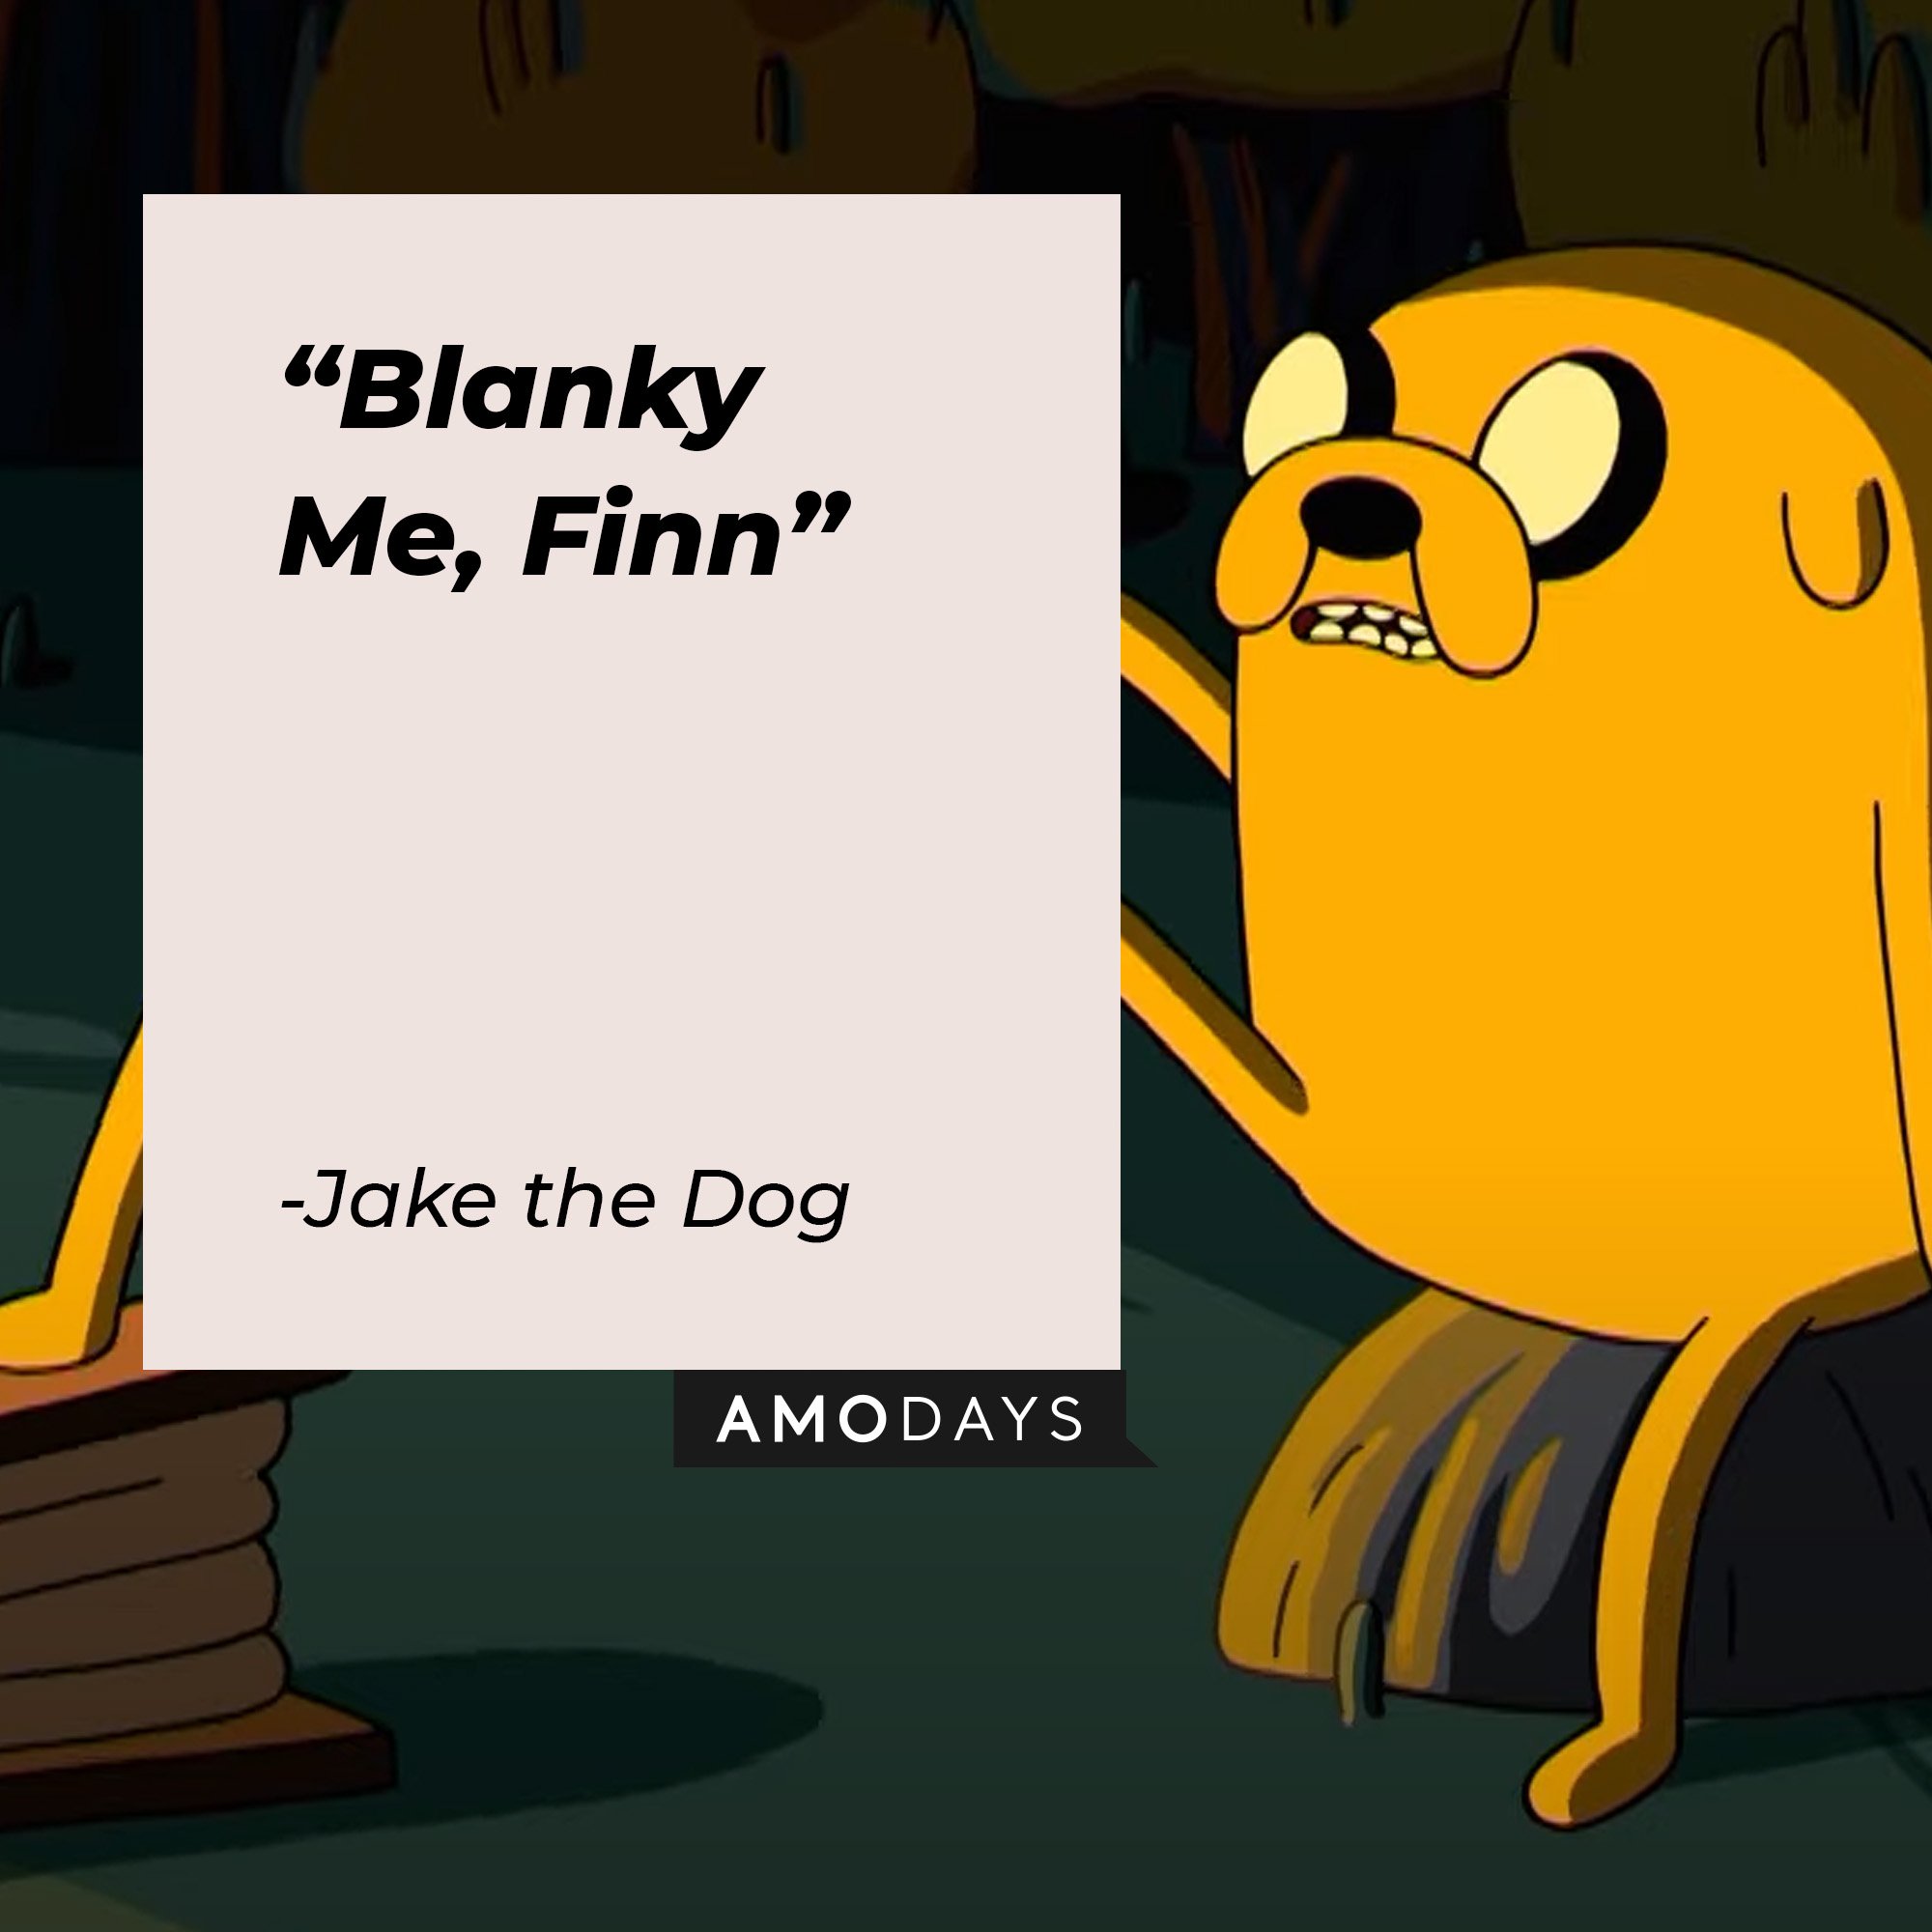 Jake the Dog's quote: "Blanky Me, Finn.” | Image: AmoDays